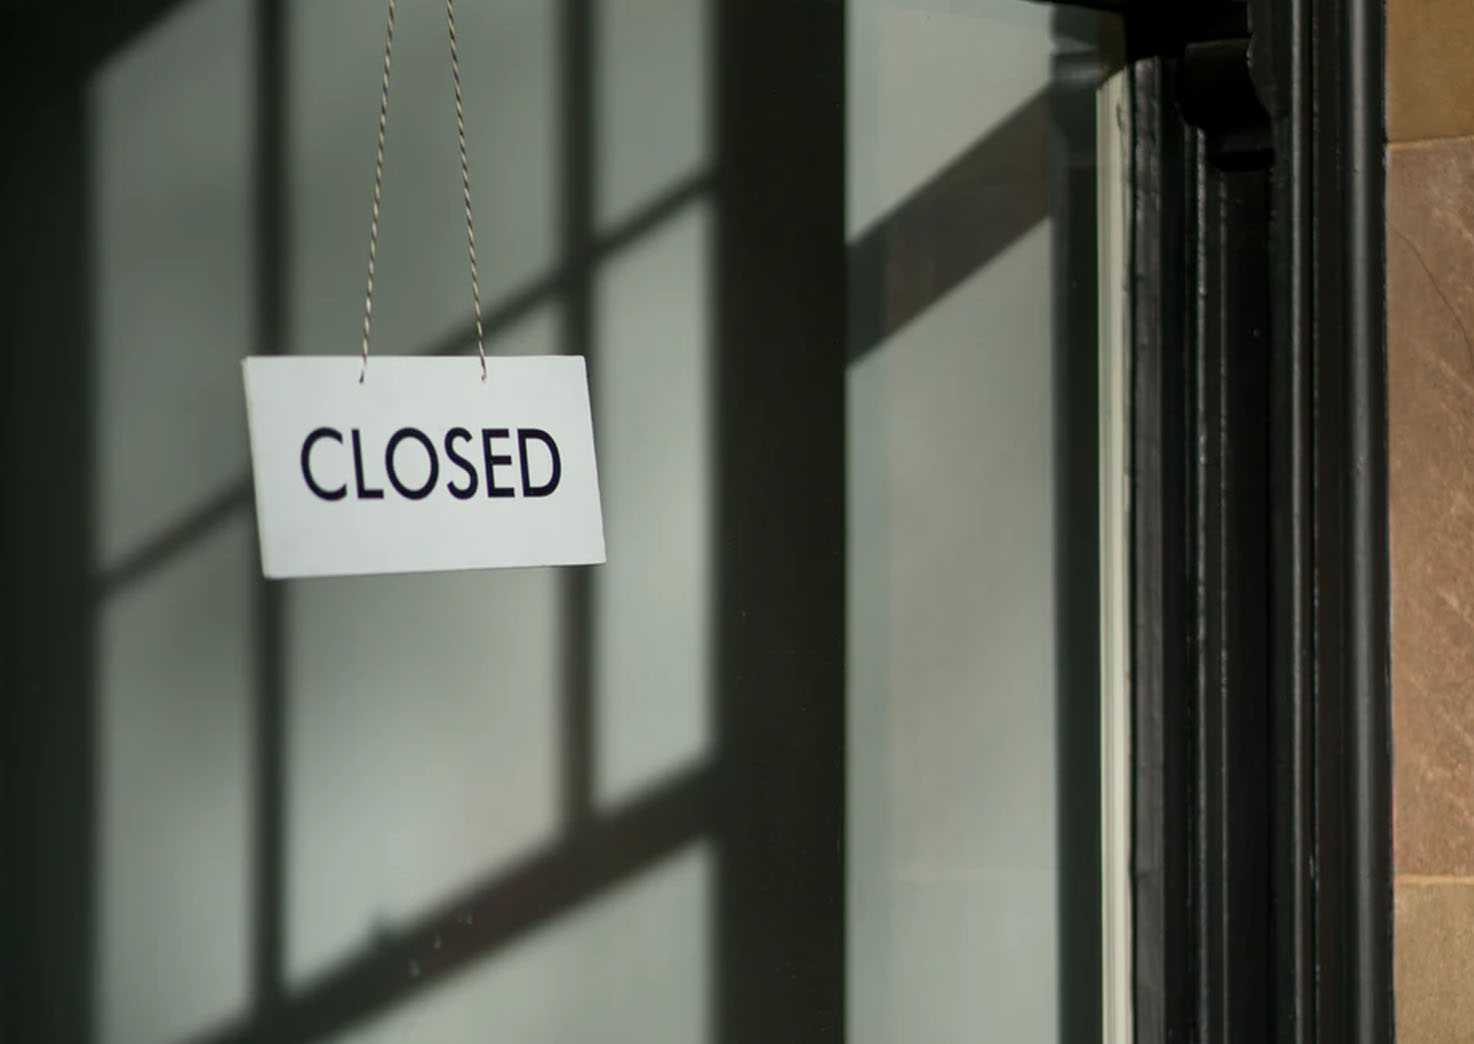 A "closed" sign hanging in the door